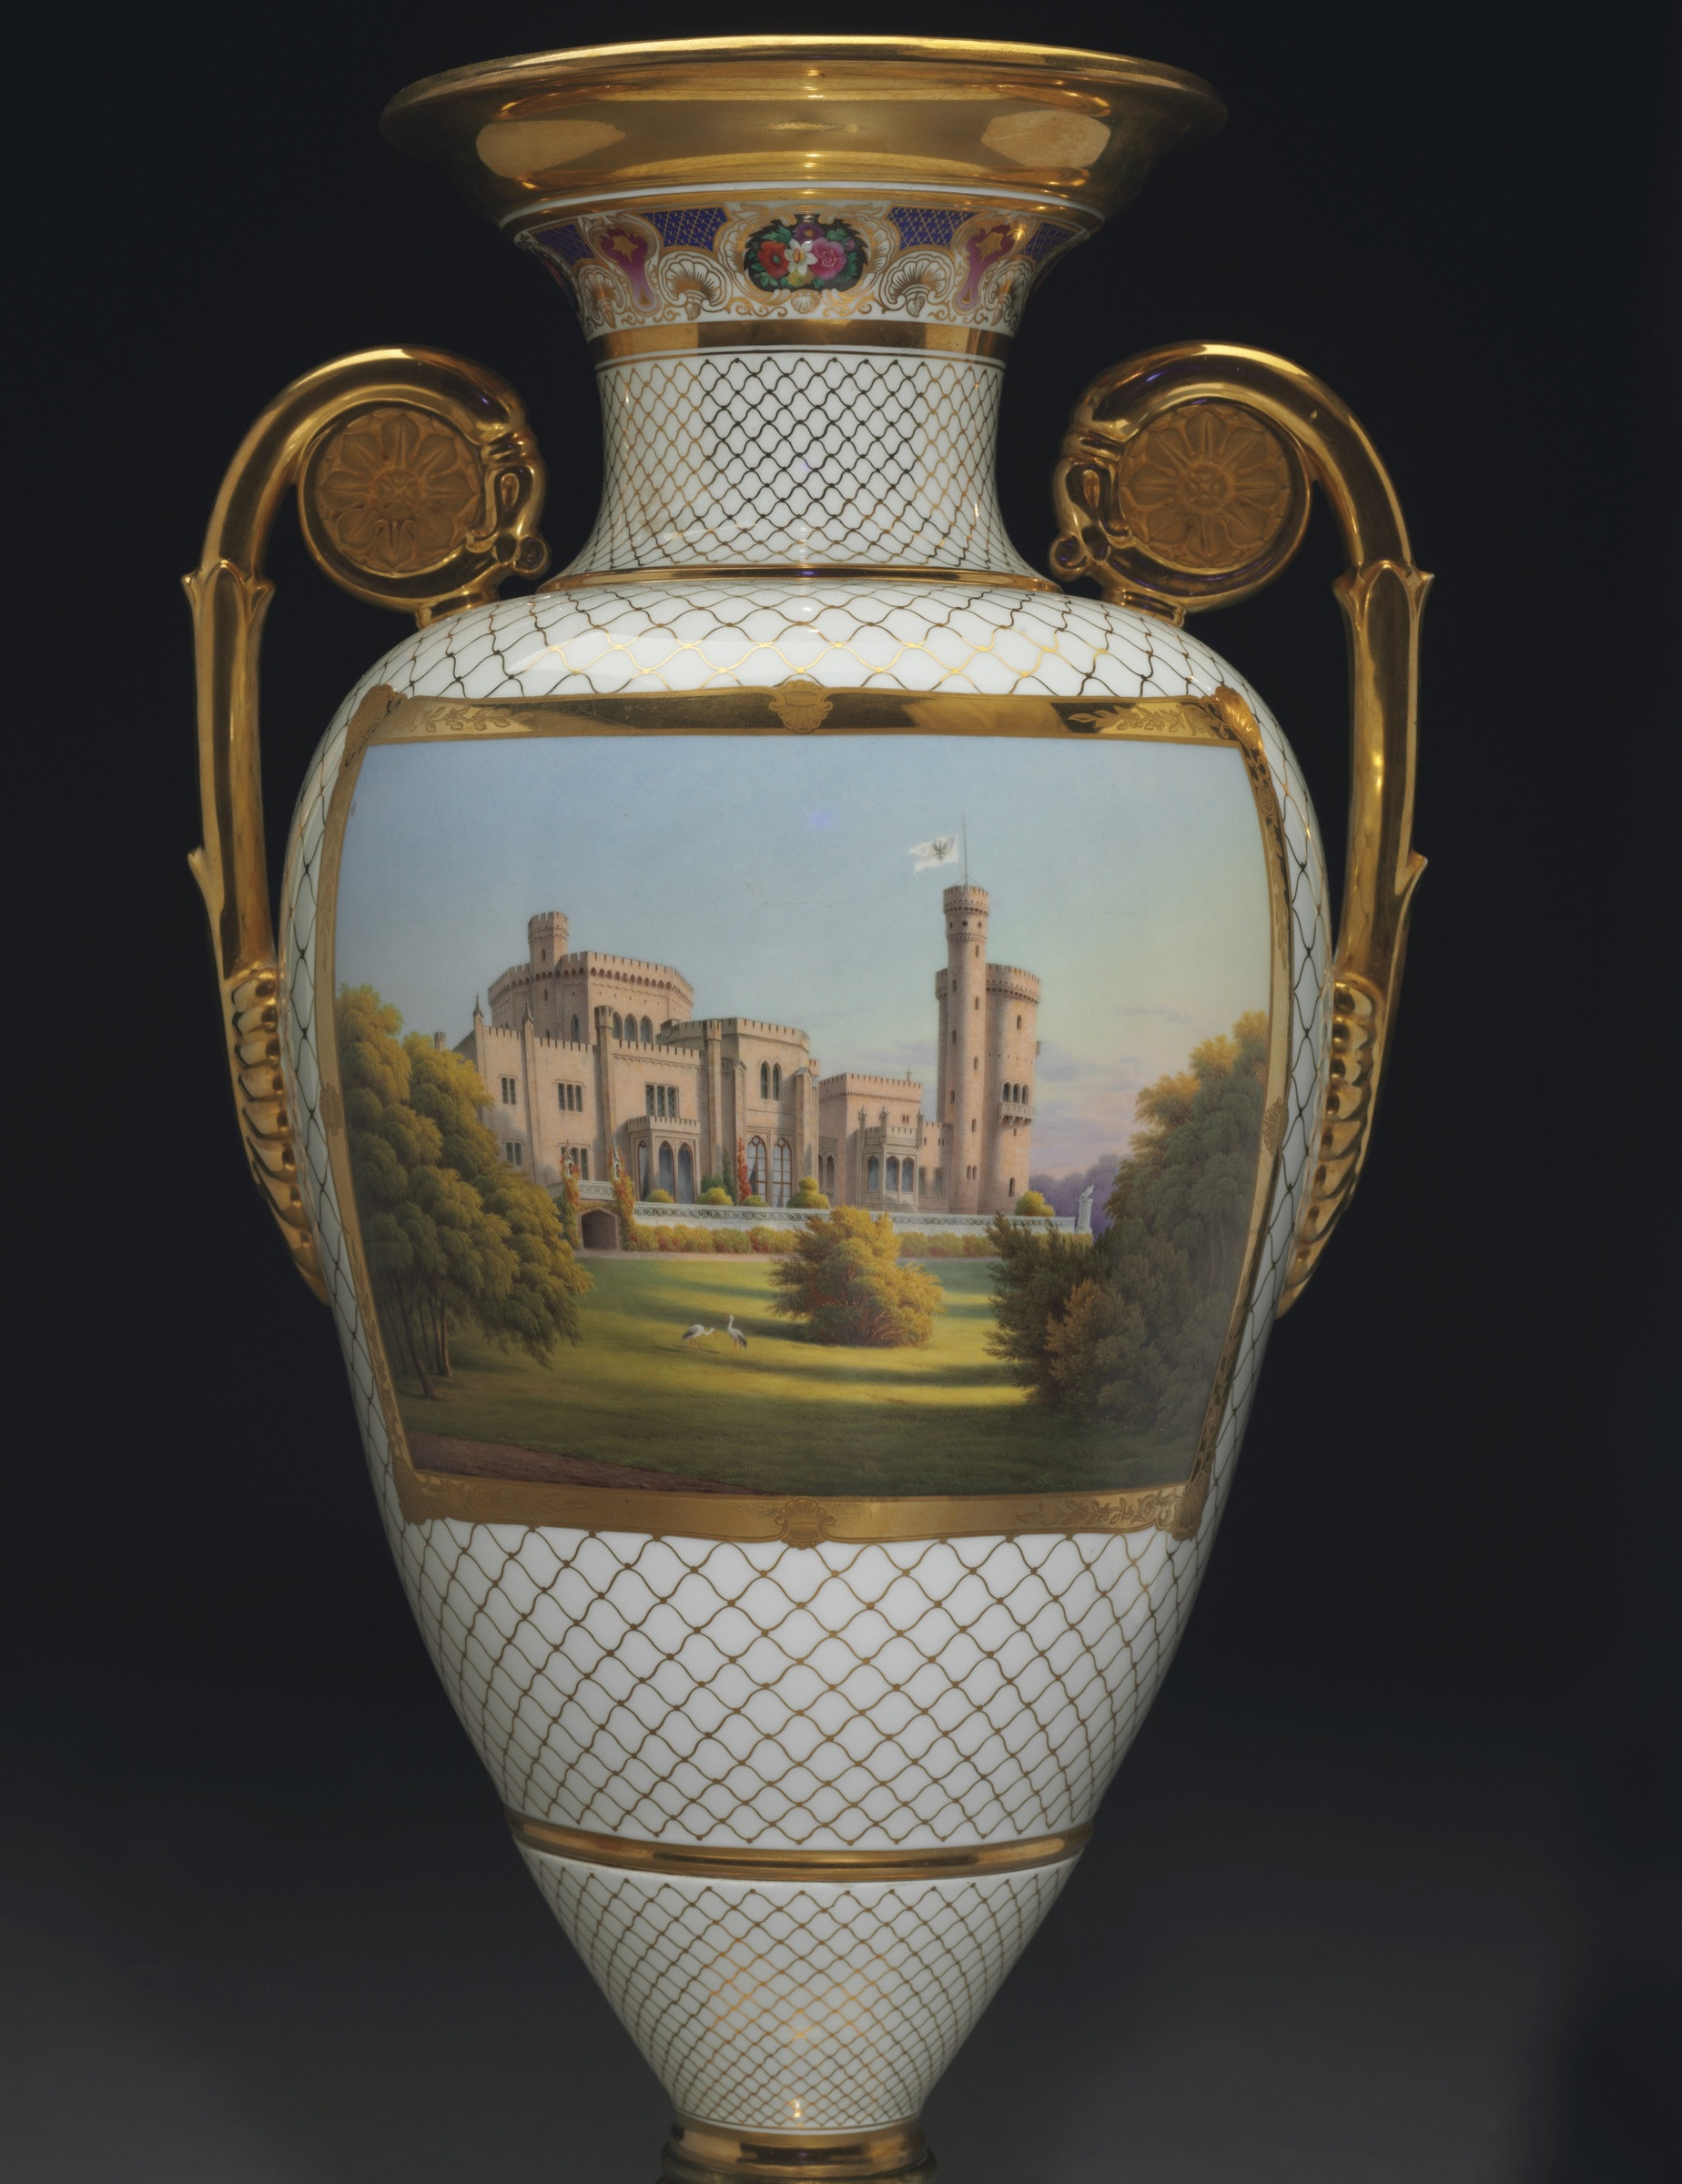 20 Best Ceramic Vase Fountain 2024 free download ceramic vase fountain of k p m kac2b6nigliche porzellan manufaktur berlin a highly important within a highly important classical armorial and topographical three piece vase garniture from th